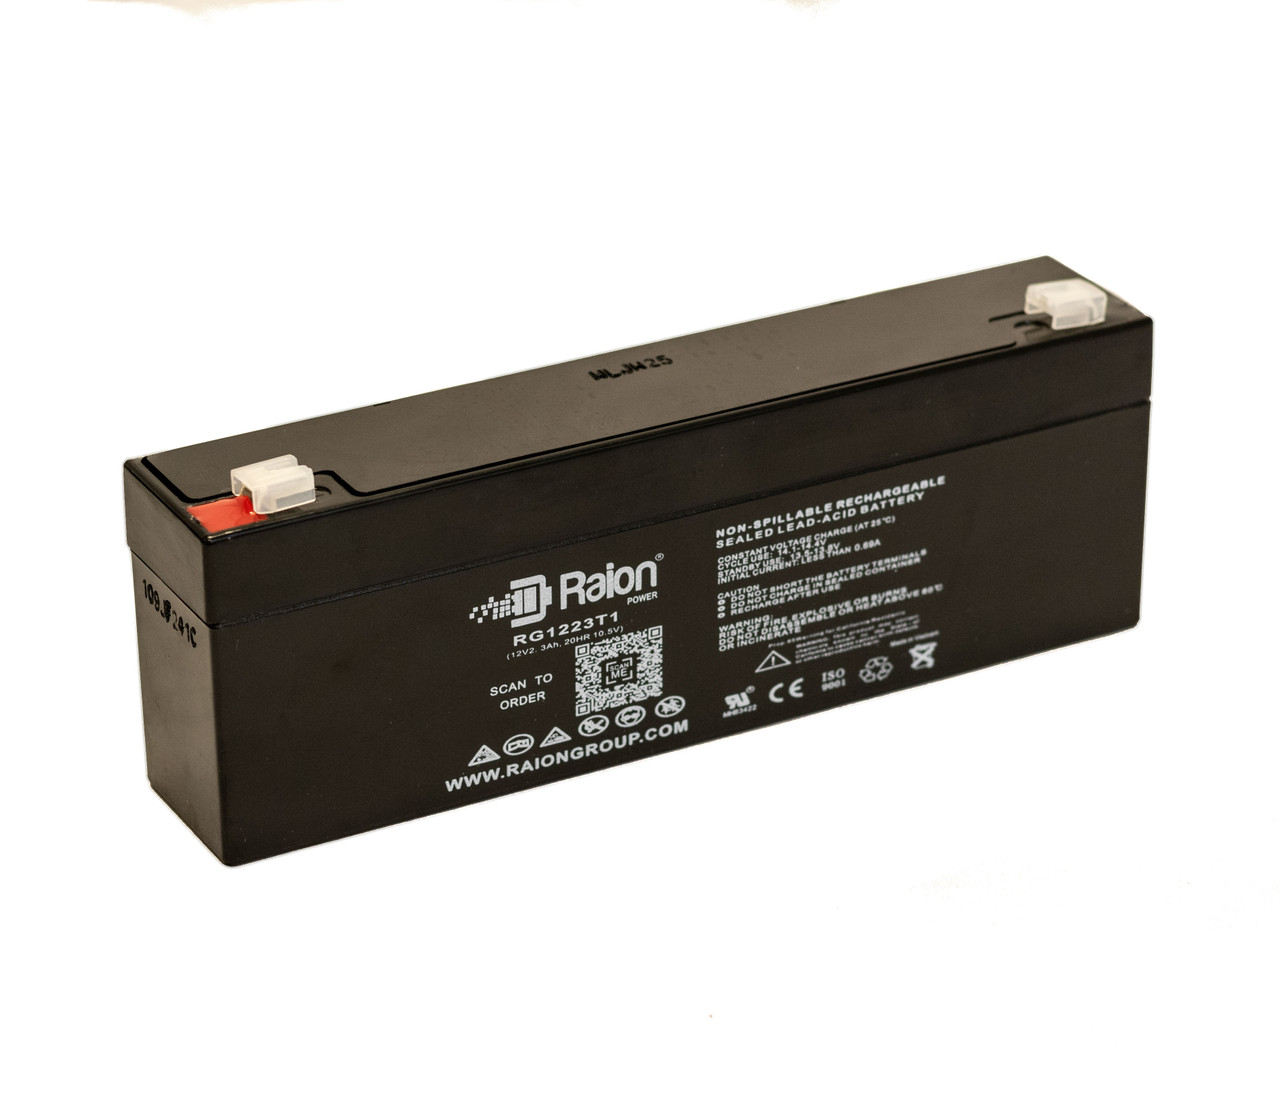 Raion Power RG1223T1 Replacement Battery for R&d 5089